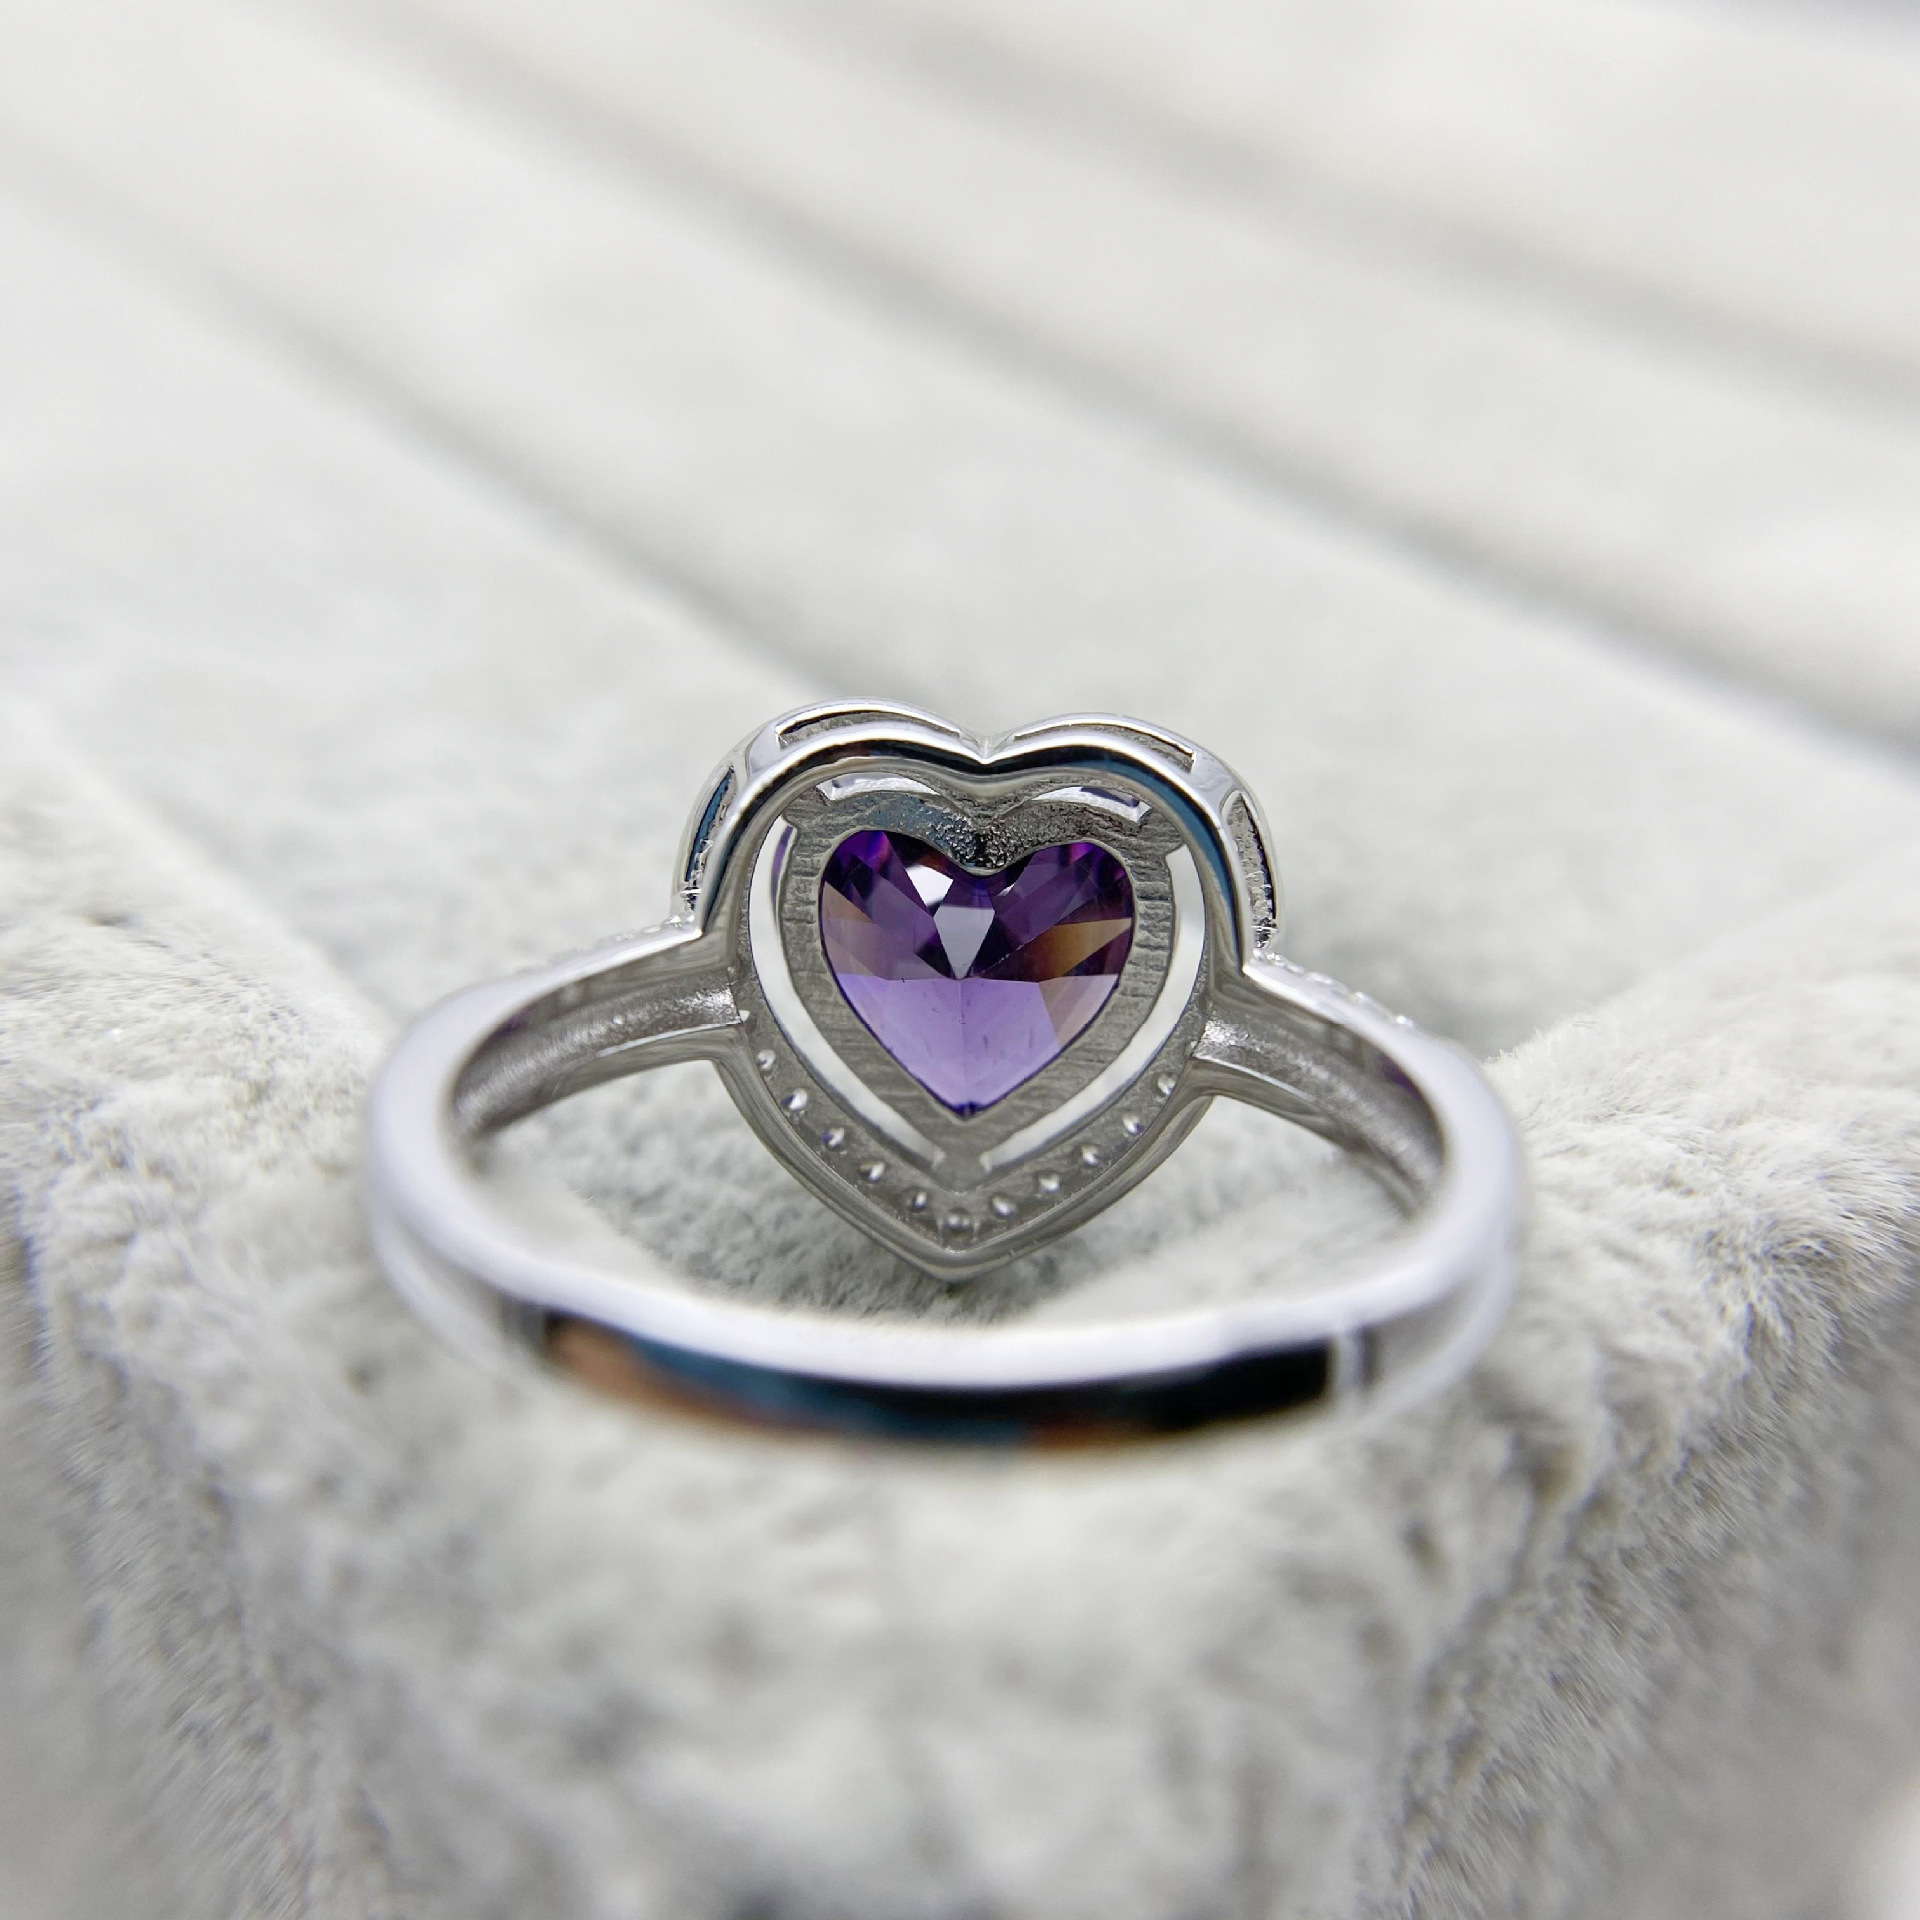 2023 New S925 sterling silver heart shaped amethyst diamond ring European and American fashion women love couple proposal ring